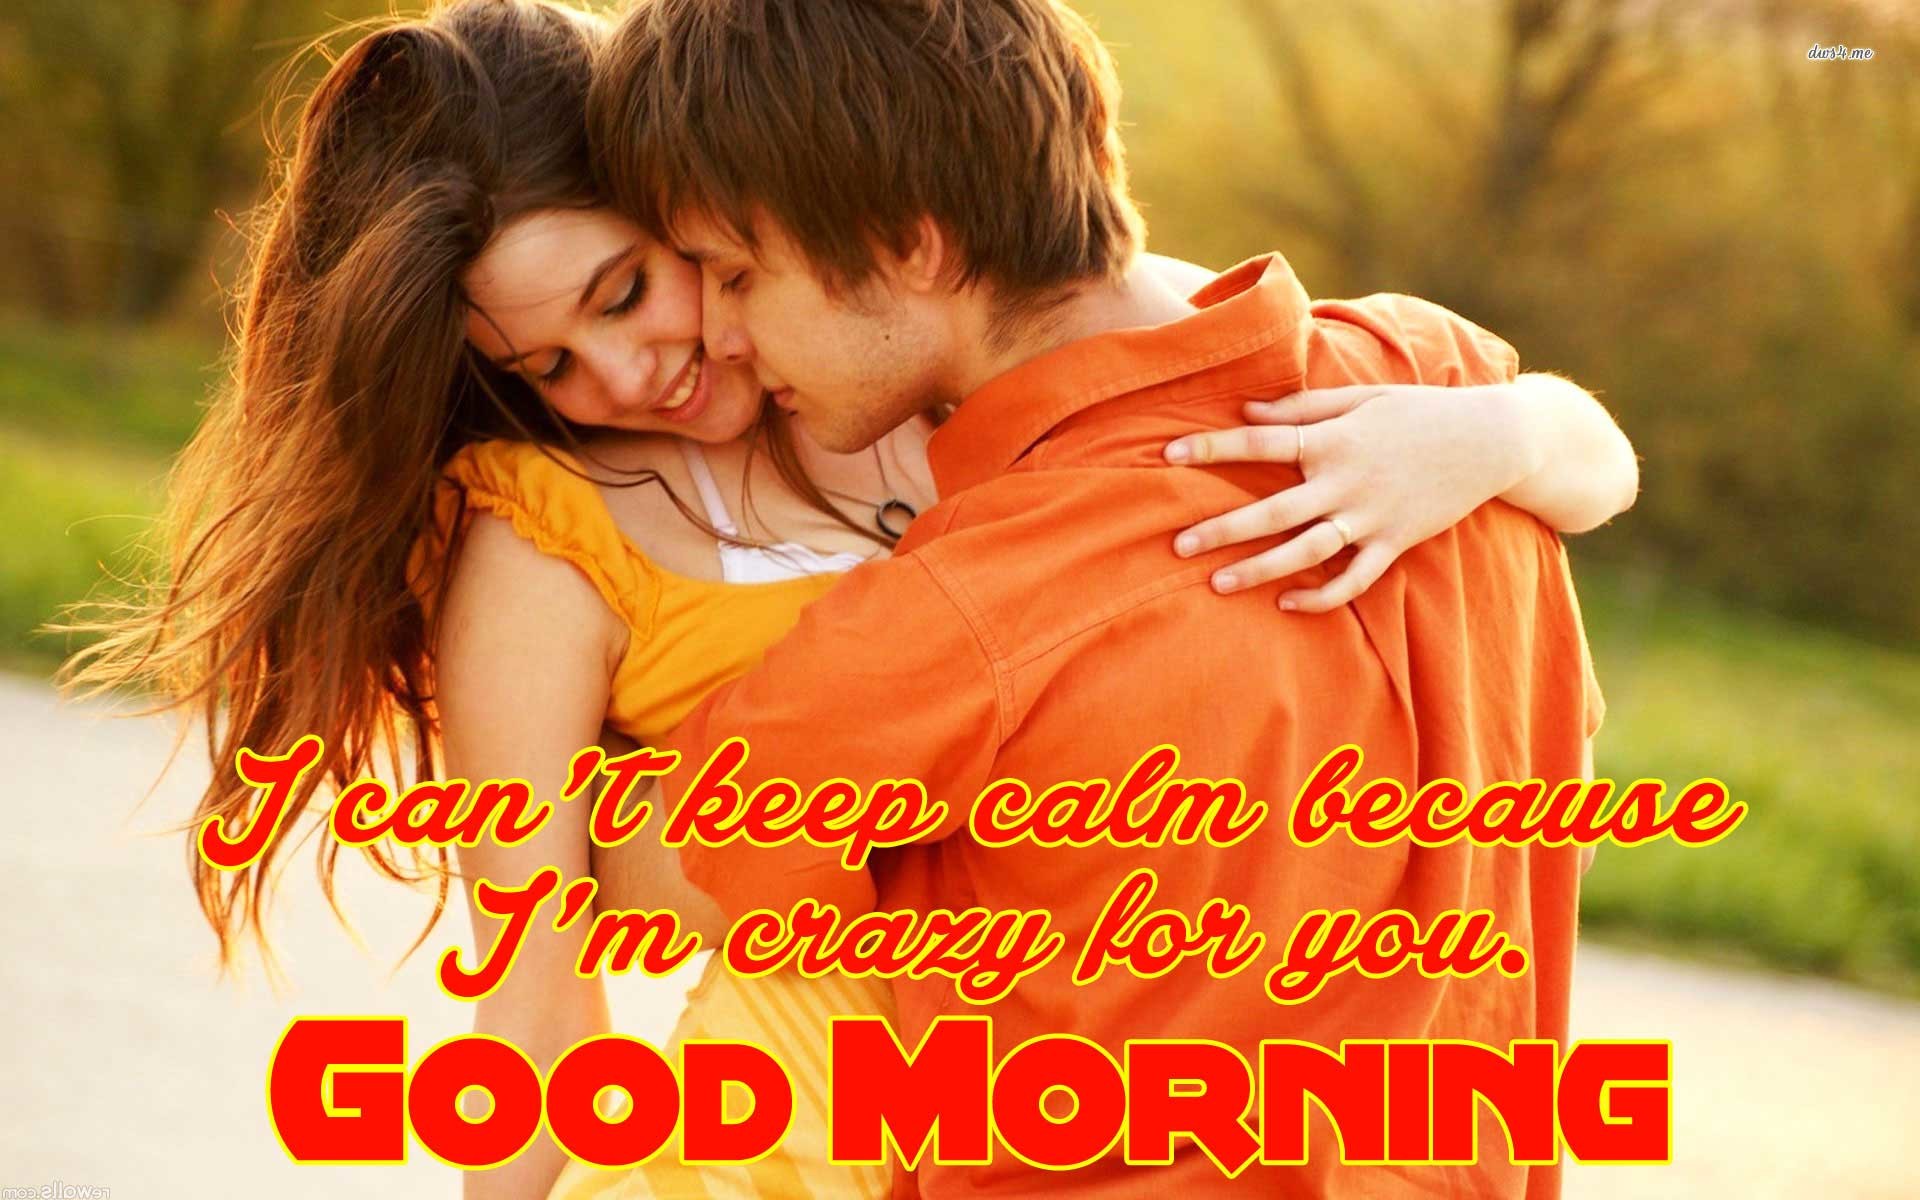 Good Morning Image with Love Couple 18